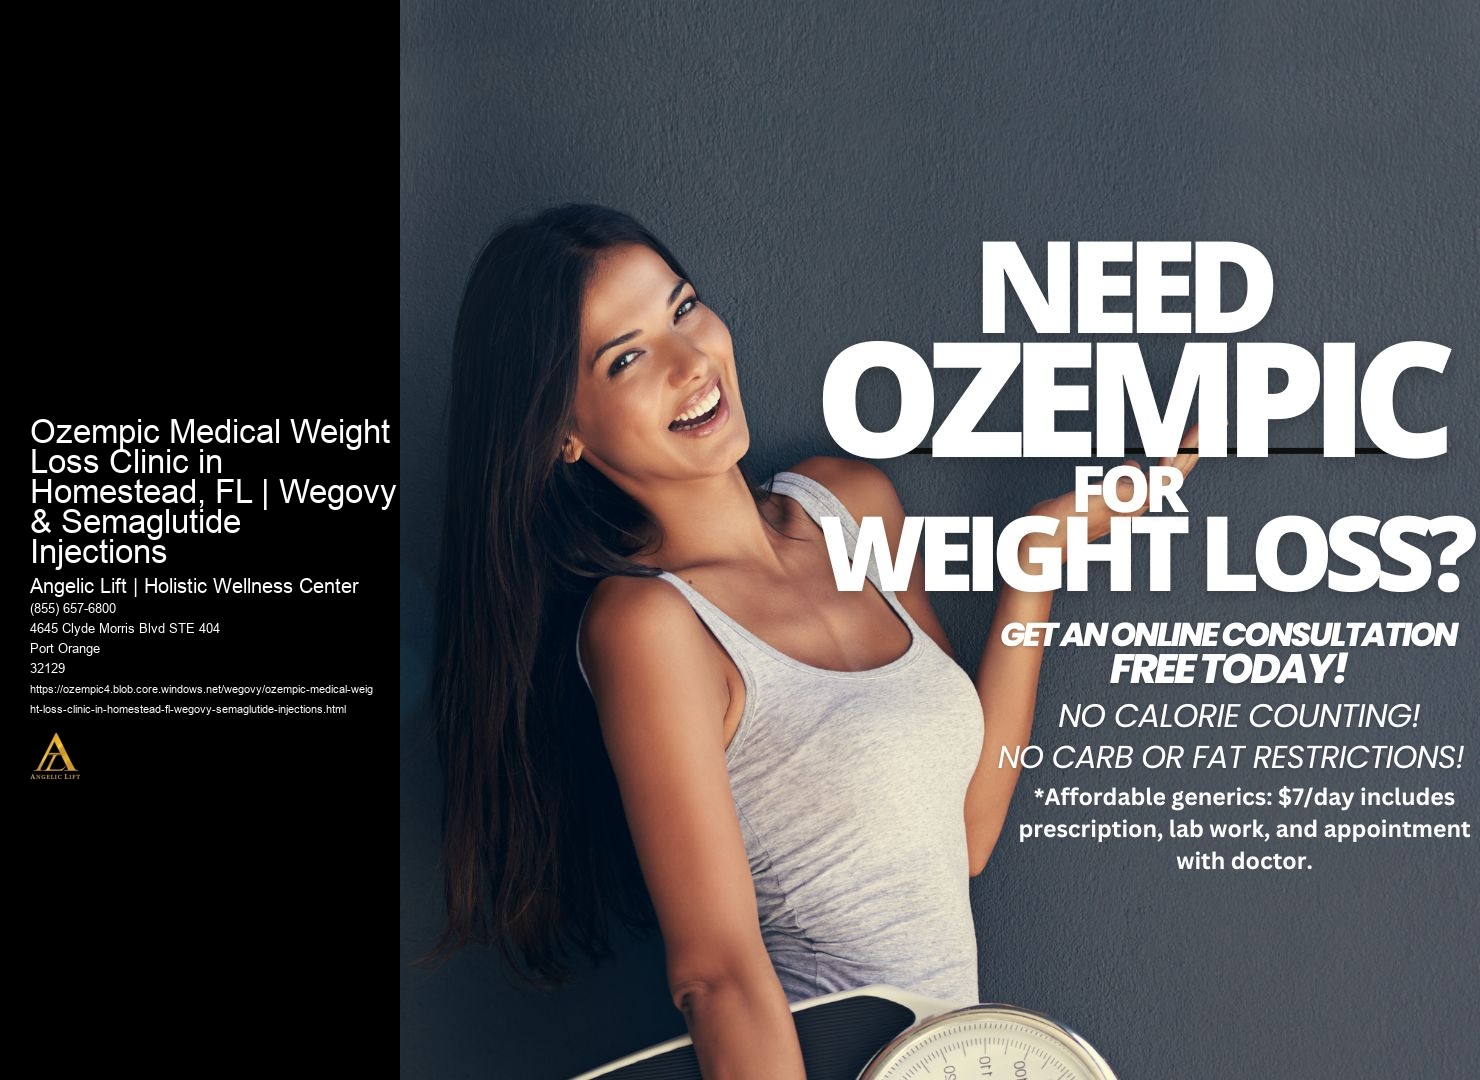 Ozempic Medical Weight Loss Clinic in Homestead, FL | Wegovy & Semaglutide Injections